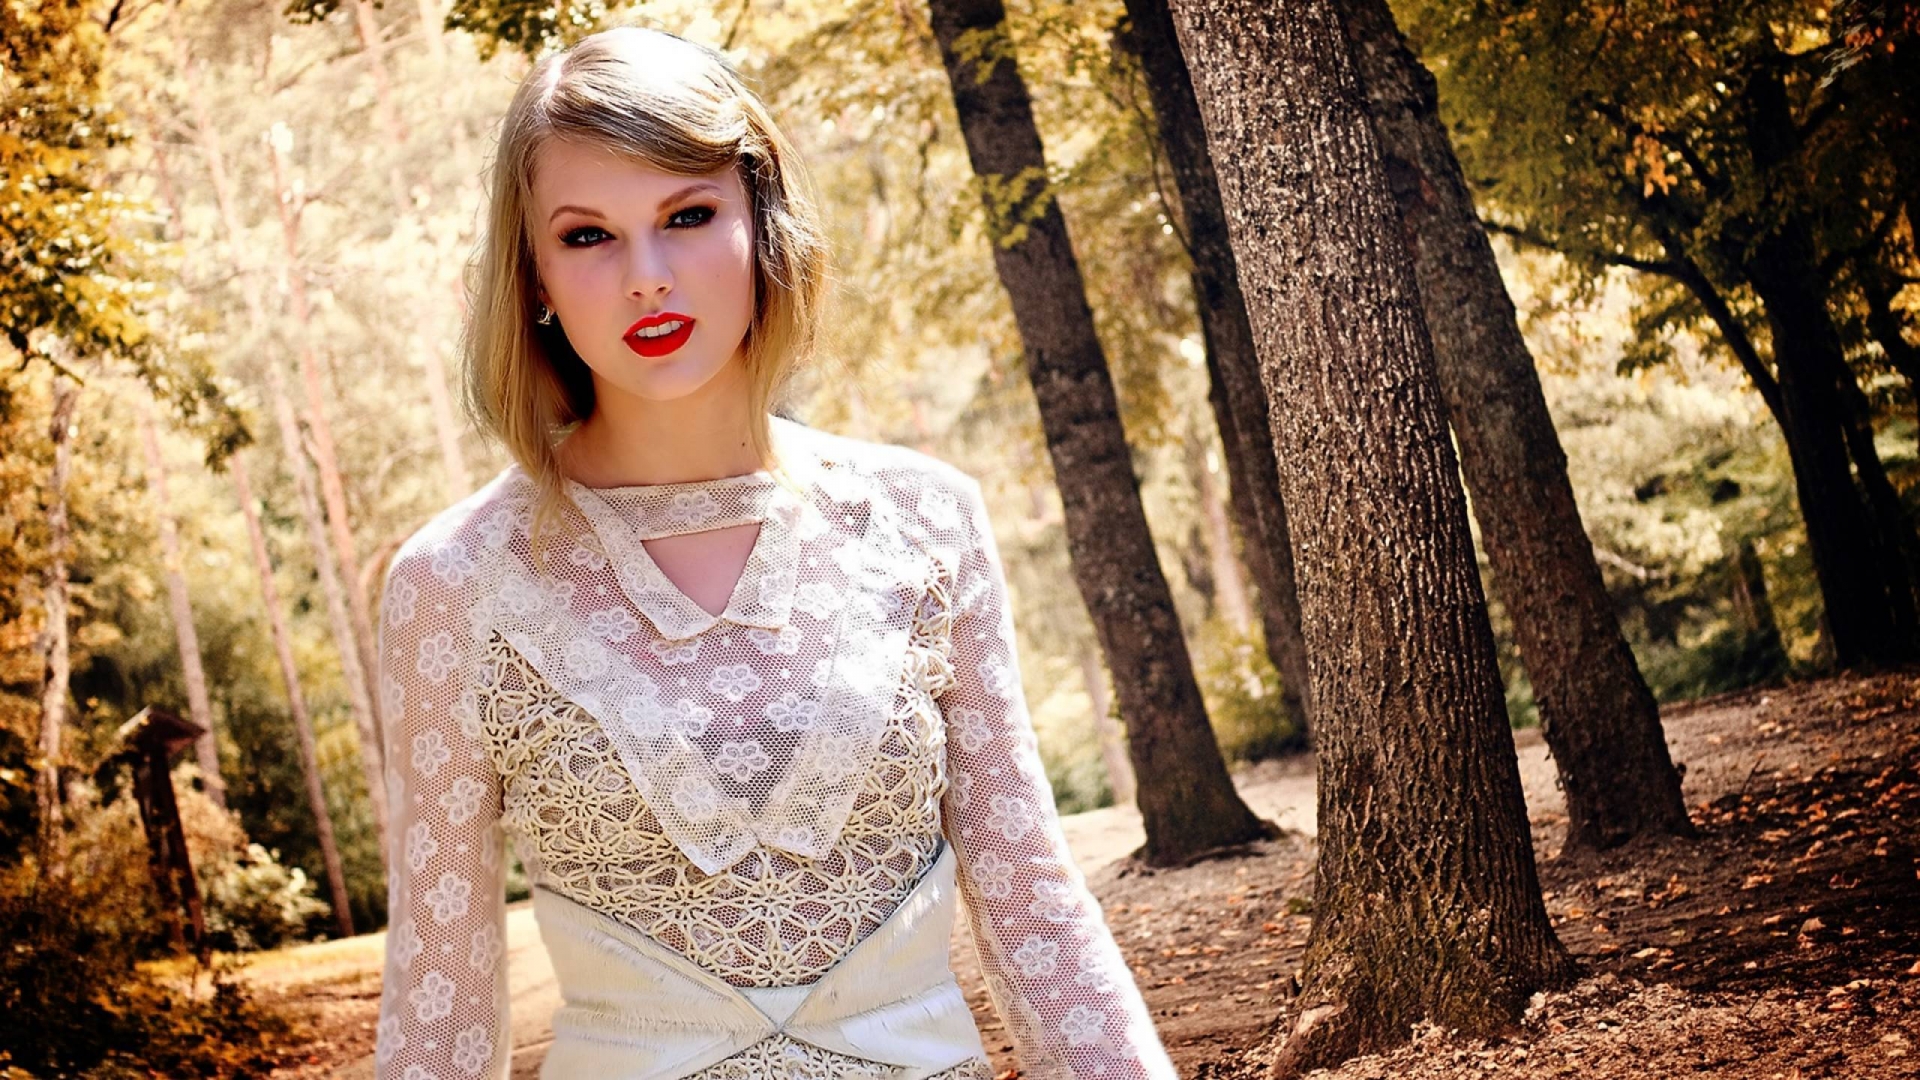 Taylor Swift in Woods for 1920 x 1080 HDTV 1080p resolution